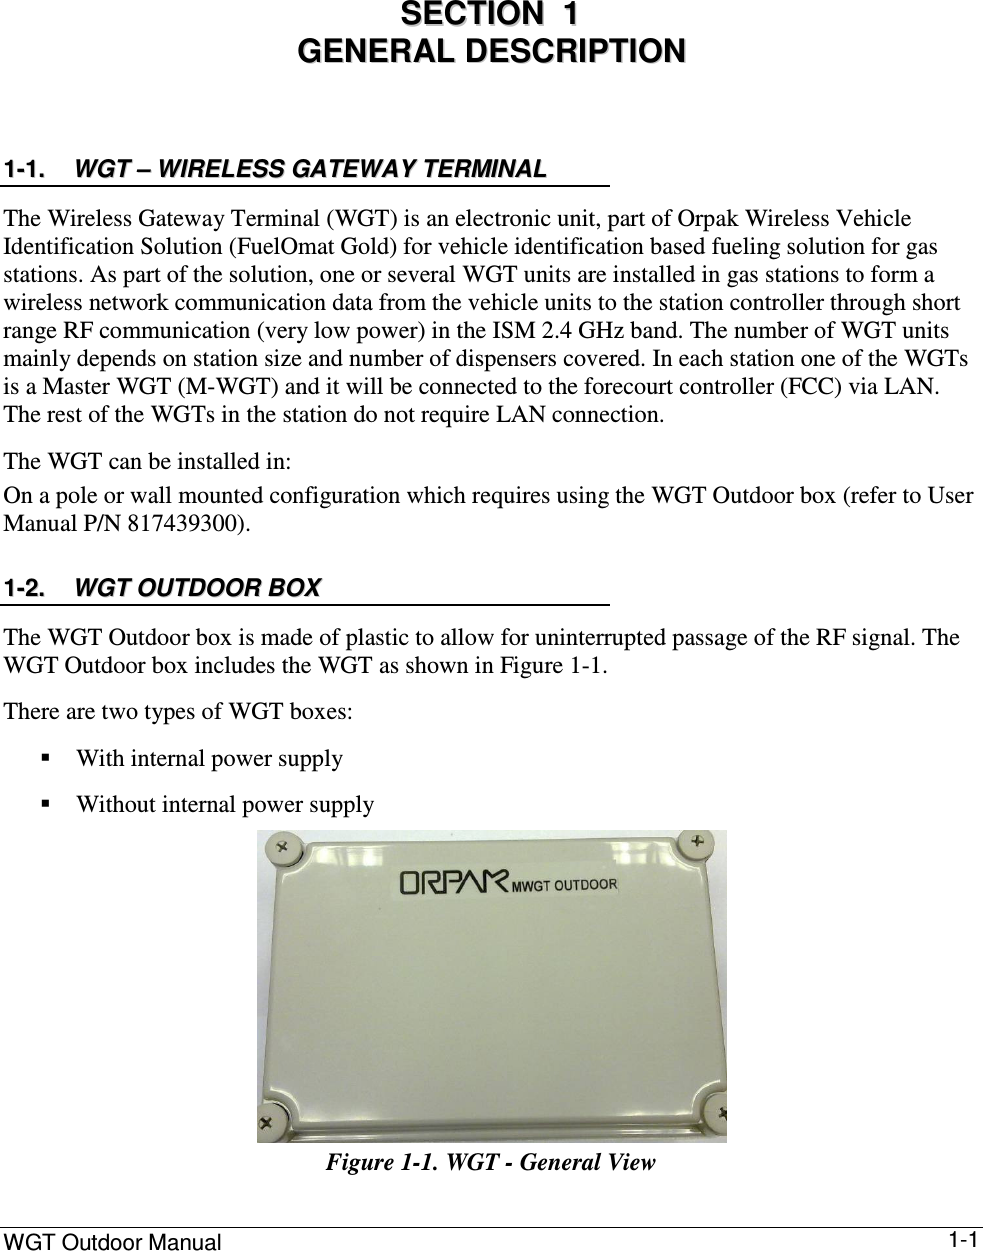 WGT Outdoor Manual      1-1 0 SSEECCTTIIOONN    11    GGEENNEERRAALL  DDEESSCCRRIIPPTTIIOONN  11--11..  WWGGTT  ––  WWIIRREELLEESSSS  GGAATTEEWWAAYY  TTEERRMMIINNAALL  The Wireless Gateway Terminal (WGT) is an electronic unit, part of Orpak Wireless Vehicle Identification Solution (FuelOmat Gold) for vehicle identification based fueling solution for gas stations. As part of the solution, one or several WGT units are installed in gas stations to form a wireless network communication data from the vehicle units to the station controller through short range RF communication (very low power) in the ISM 2.4 GHz band. The number of WGT units mainly depends on station size and number of dispensers covered. In each station one of the WGTs is a Master WGT (M-WGT) and it will be connected to the forecourt controller (FCC) via LAN. The rest of the WGTs in the station do not require LAN connection.  The WGT can be installed in: On a pole or wall mounted configuration which requires using the WGT Outdoor box (refer to User Manual P/N 817439300). 11--22..  WWGGTT  OOUUTTDDOOOORR  BBOOXX  The WGT Outdoor box is made of plastic to allow for uninterrupted passage of the RF signal. The WGT Outdoor box includes the WGT as shown in Figure  1-1.  There are two types of WGT boxes:   With internal power supply  Without internal power supply  Figure  1-1. WGT - General View  